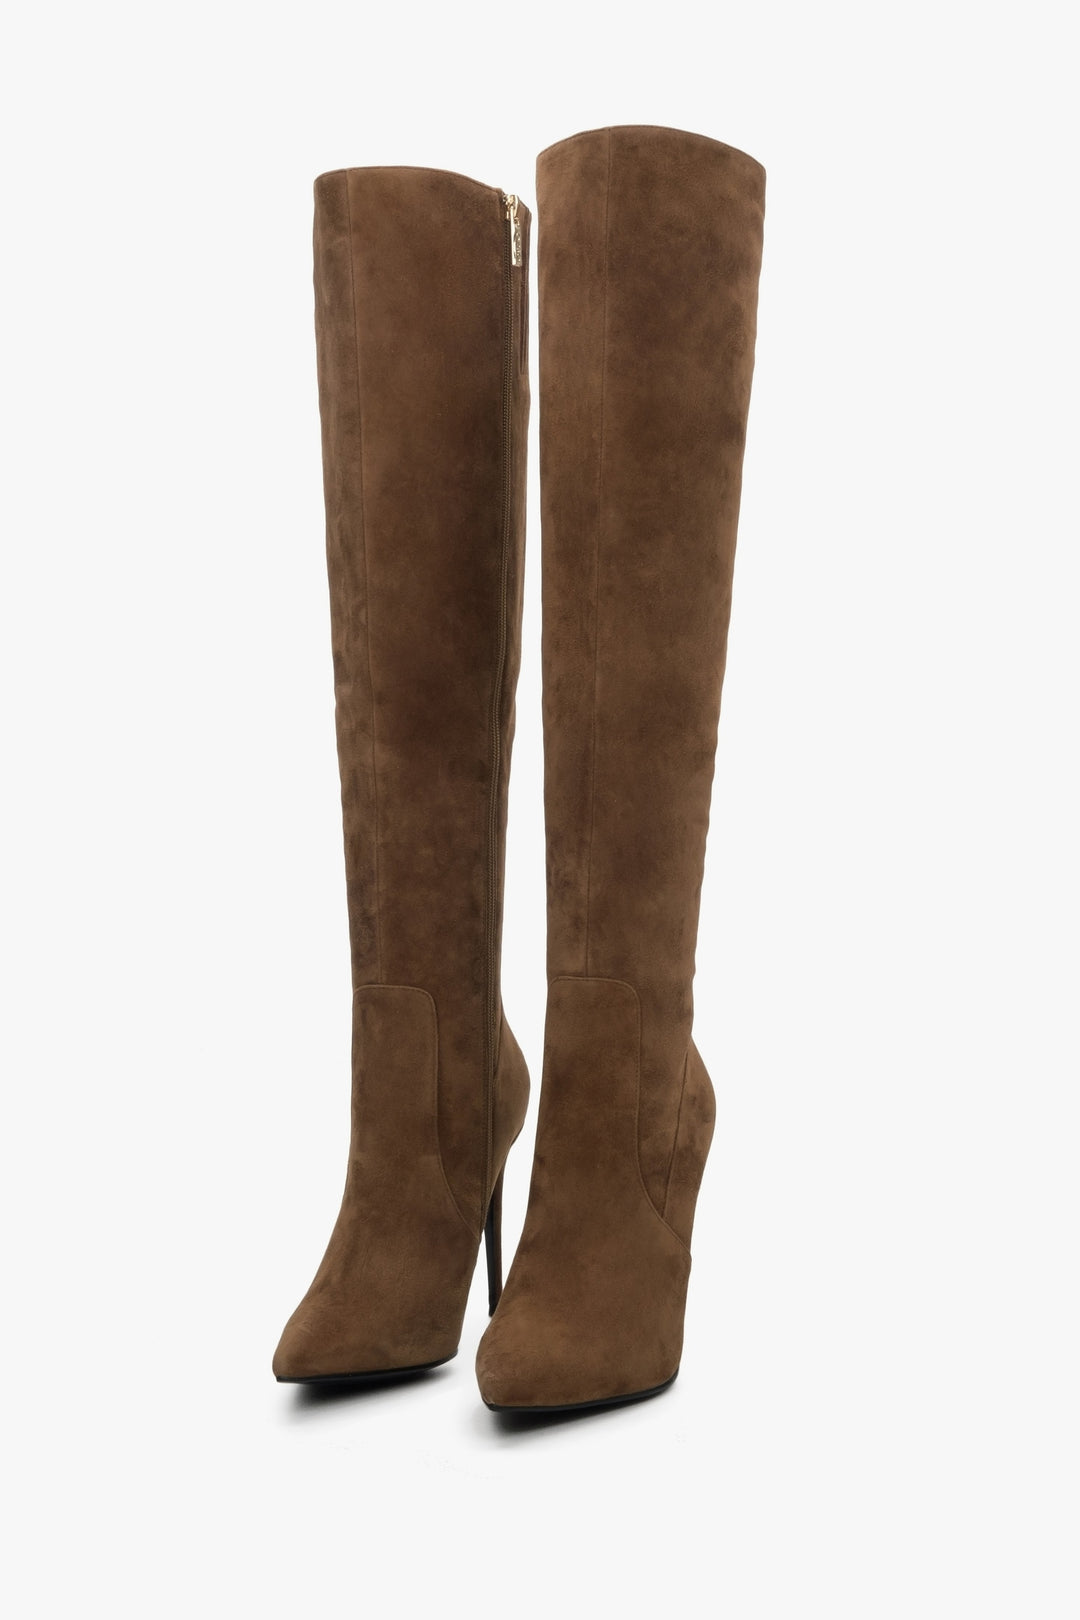 Stretchy velour brown knee-high boots Estro.